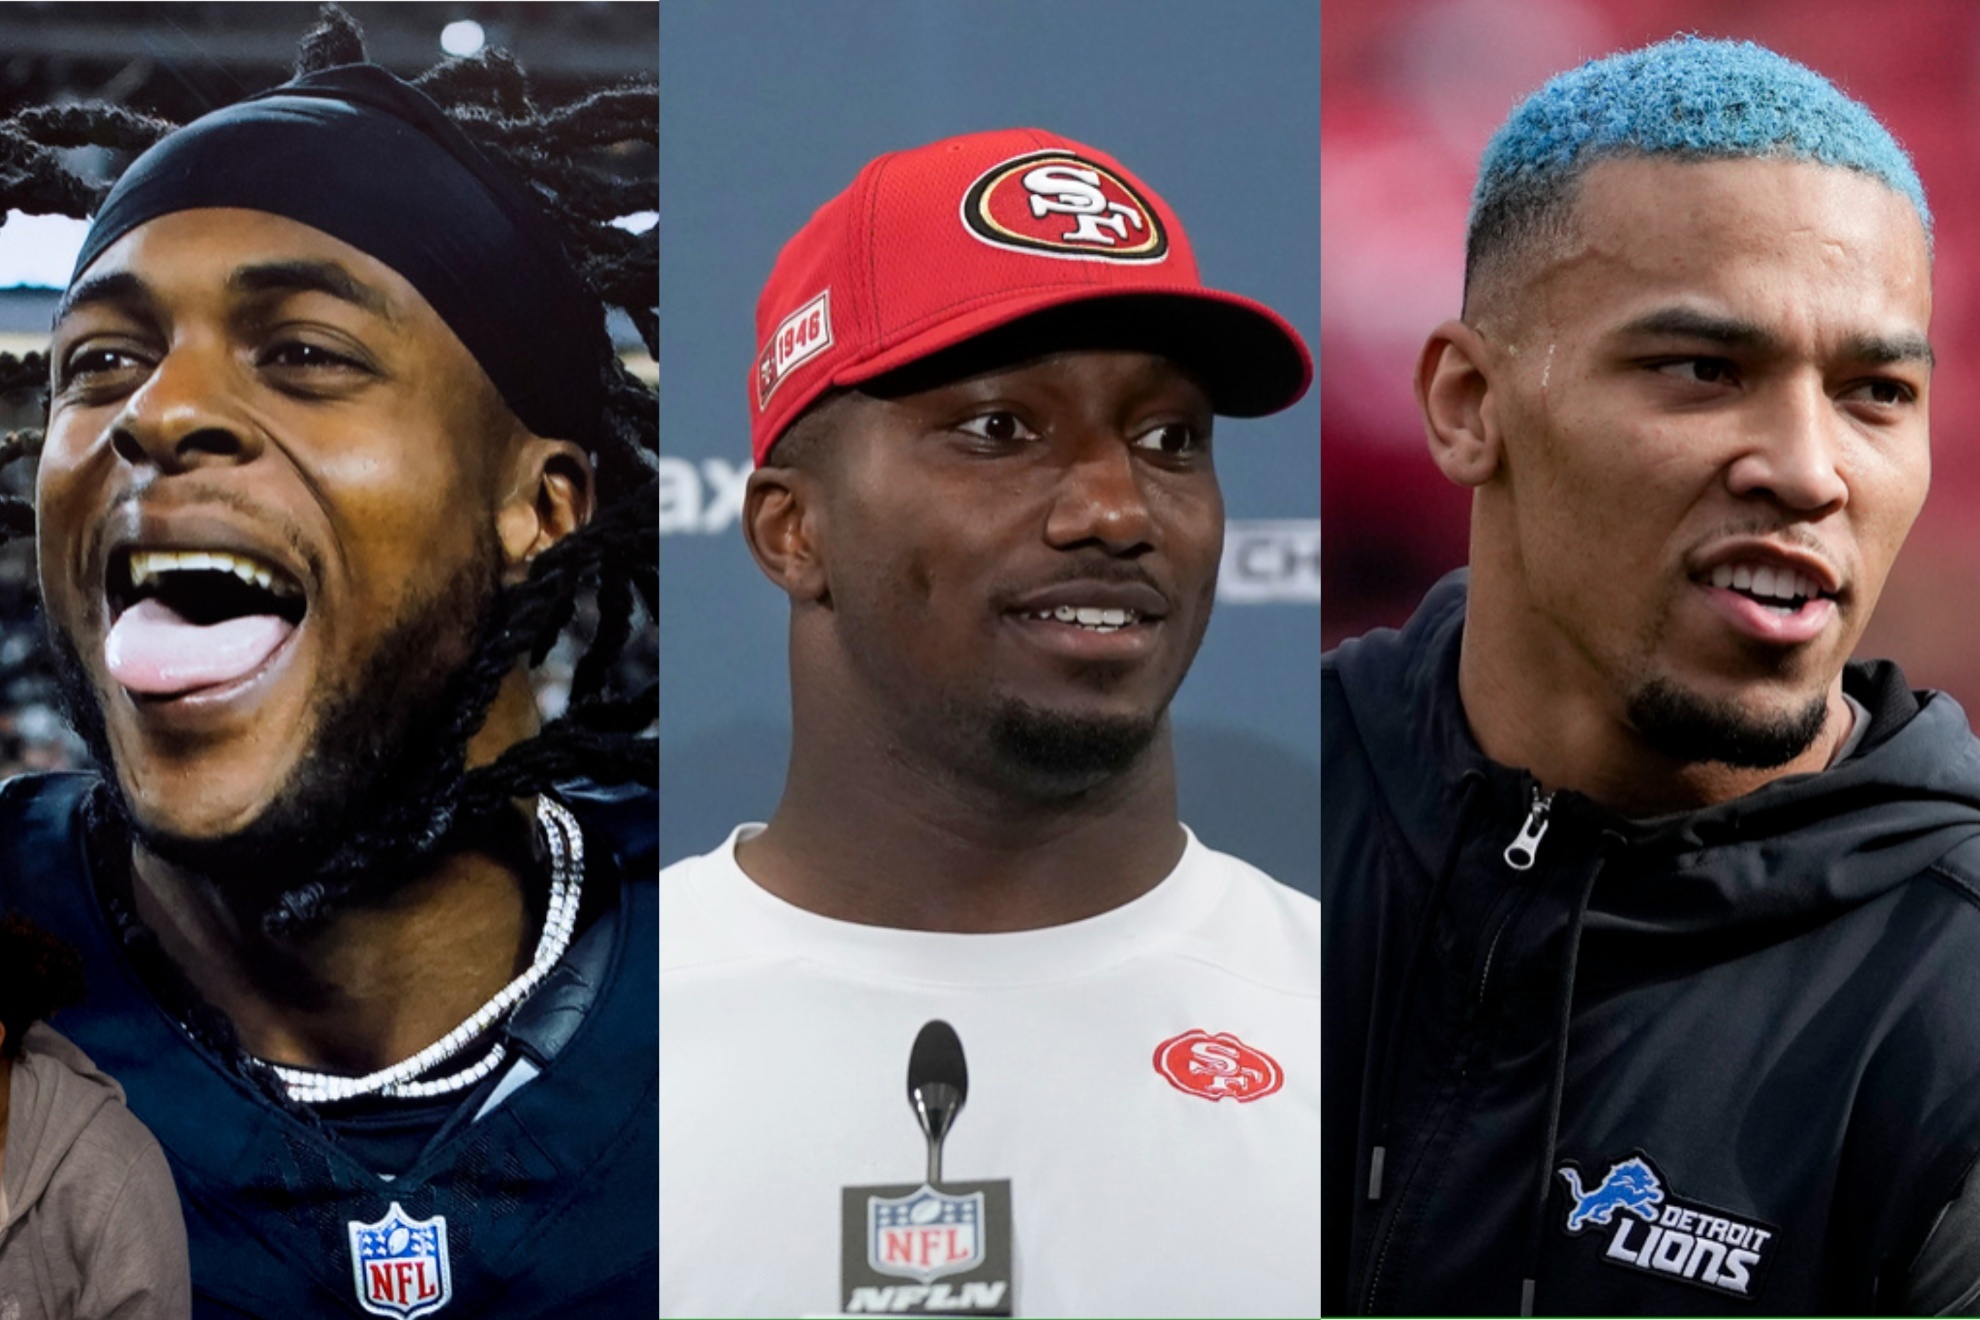 Davante Adams, Deebo Samuel, and Amon-Ra St. Brown will be part of the series.